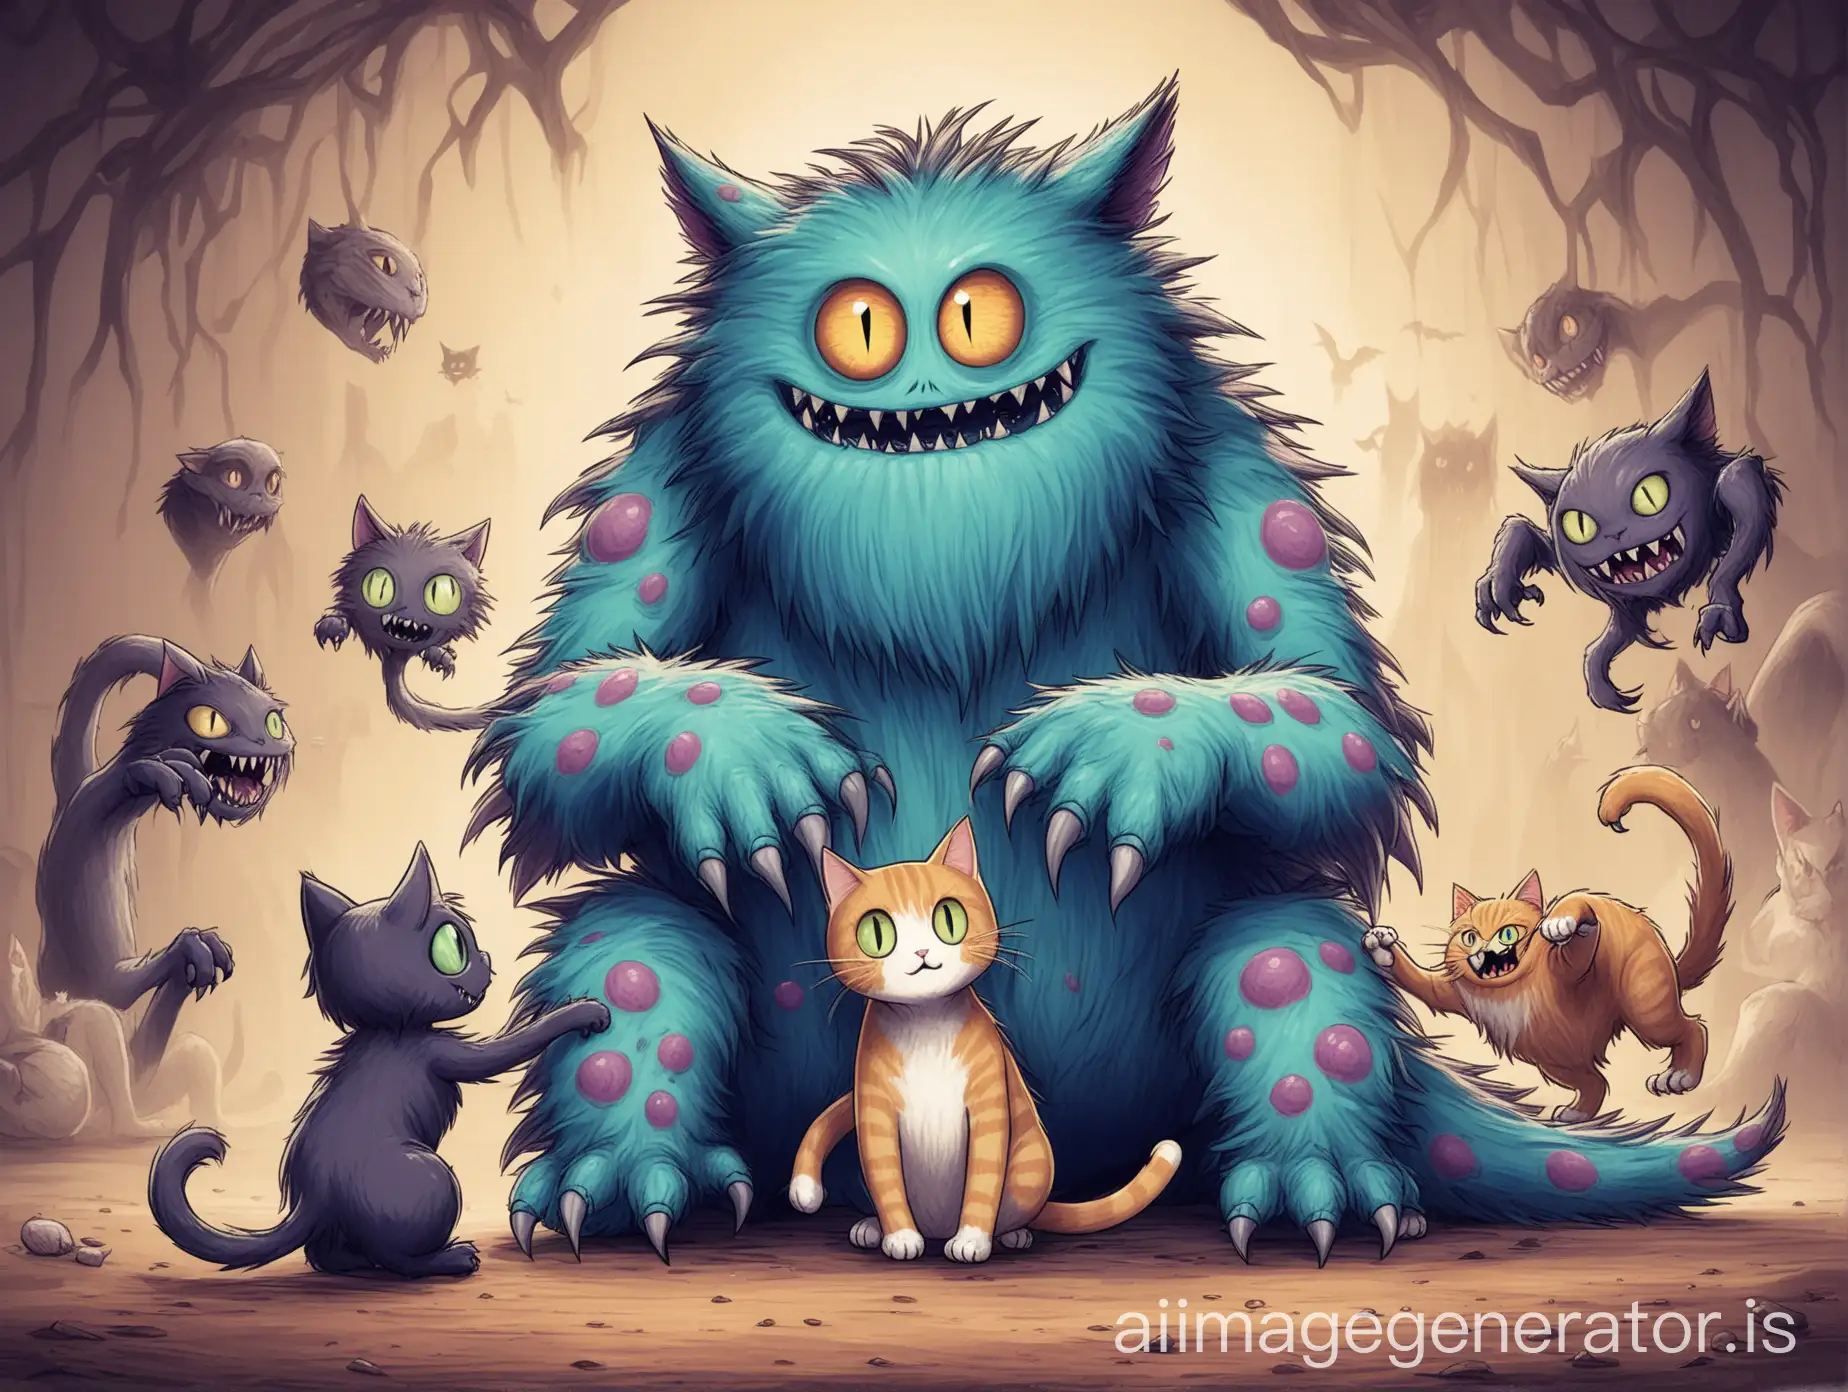 Adorable-Monster-and-Cat-Friendship-Playful-Creatures-Bonding